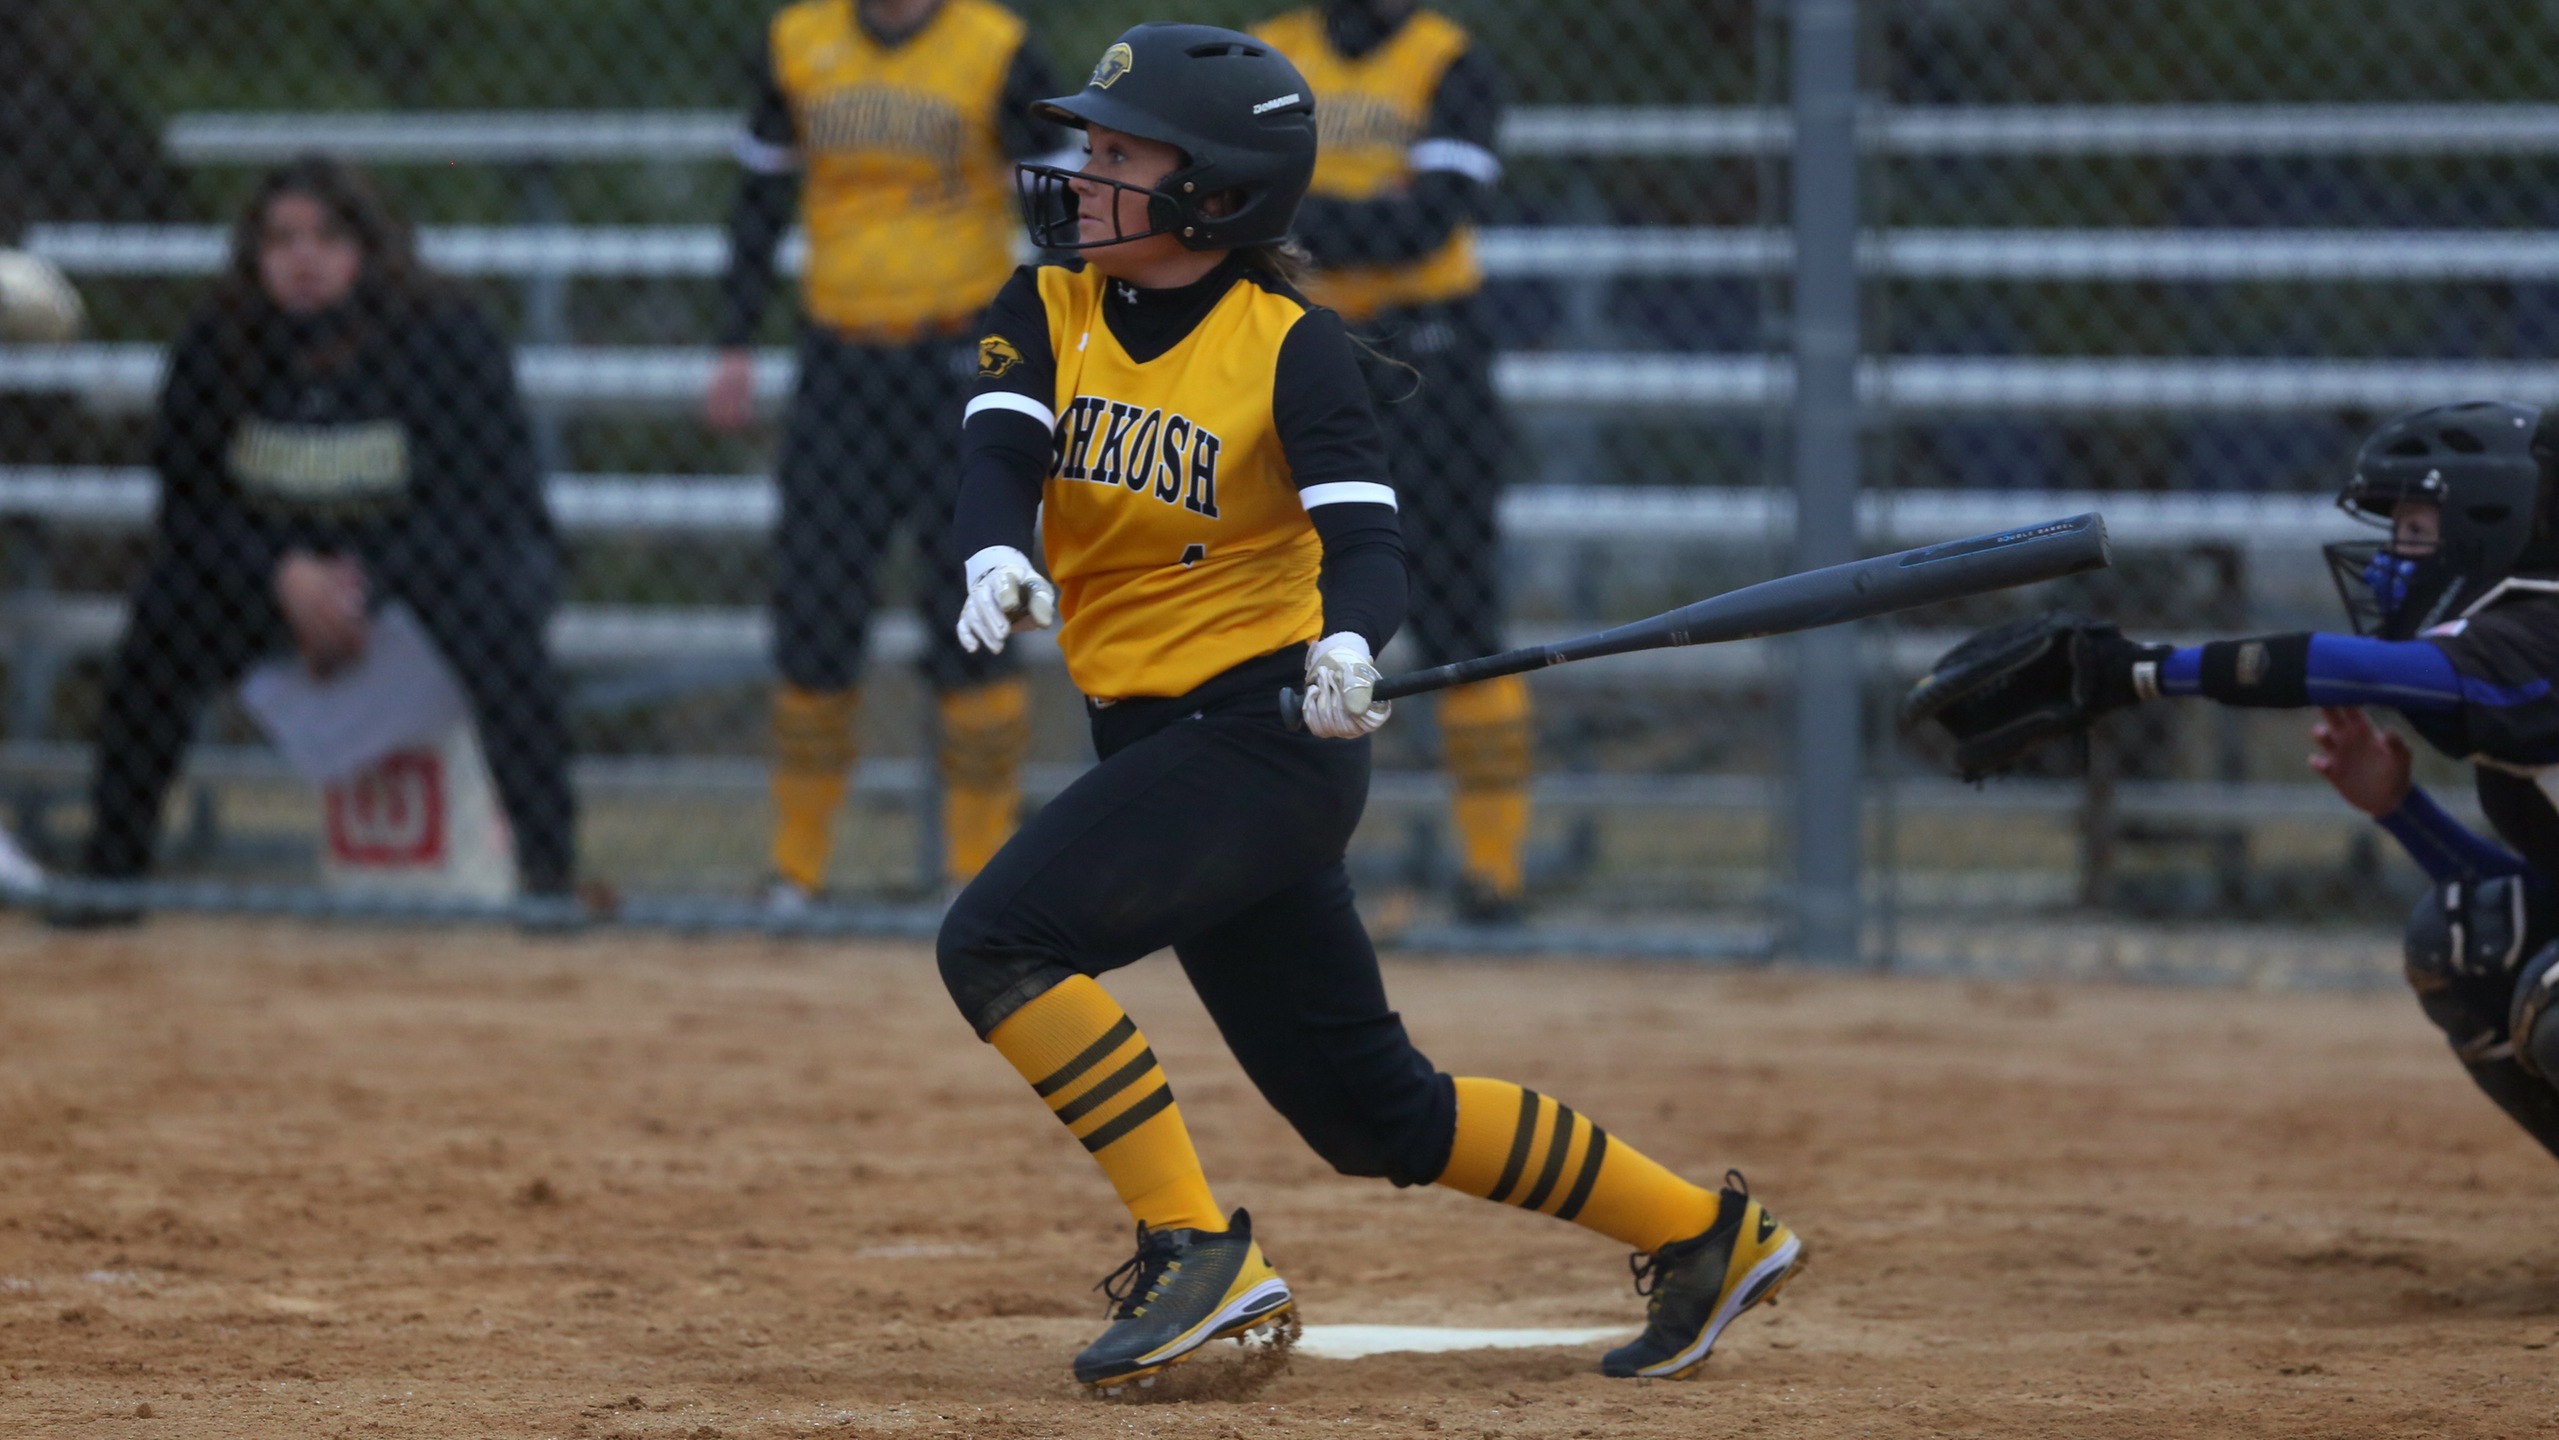 Kailee Garstecki totaled four hits and four RBIs in the two games against the Muskies.